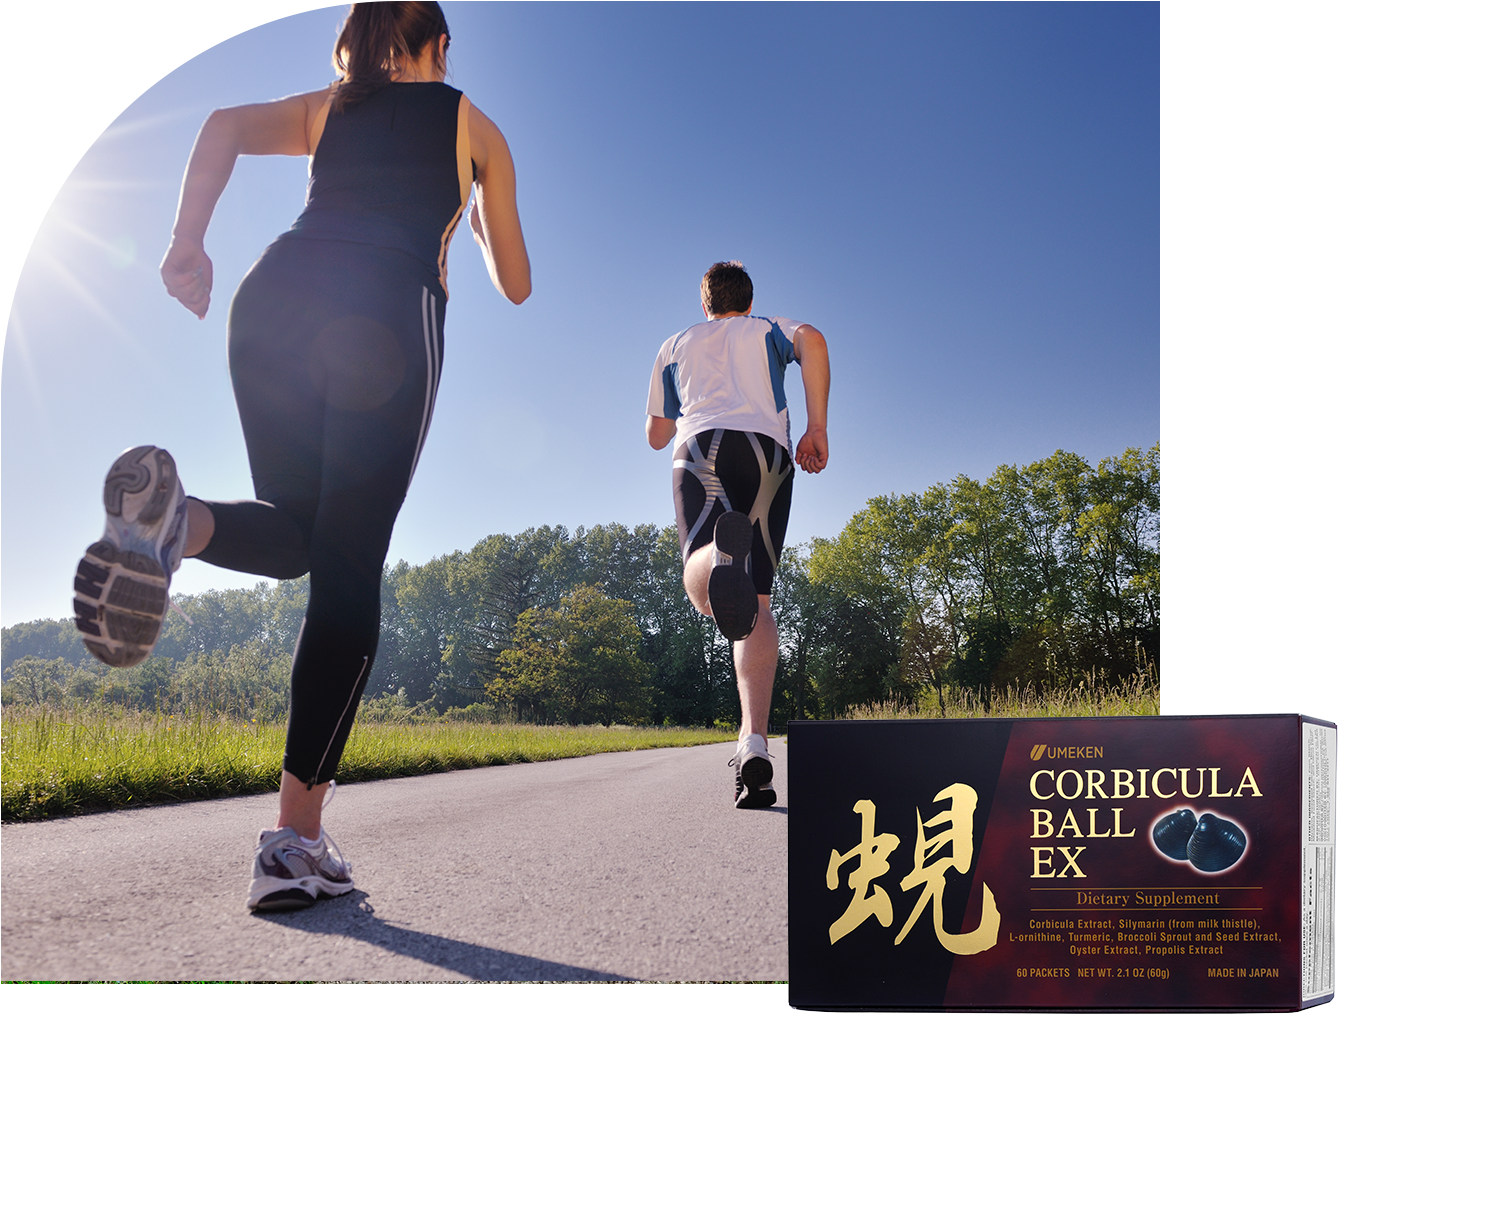 With 8 liver-friendly ingredients, Corbicula Ball EX helps support liver health and may help decrease fatigue.